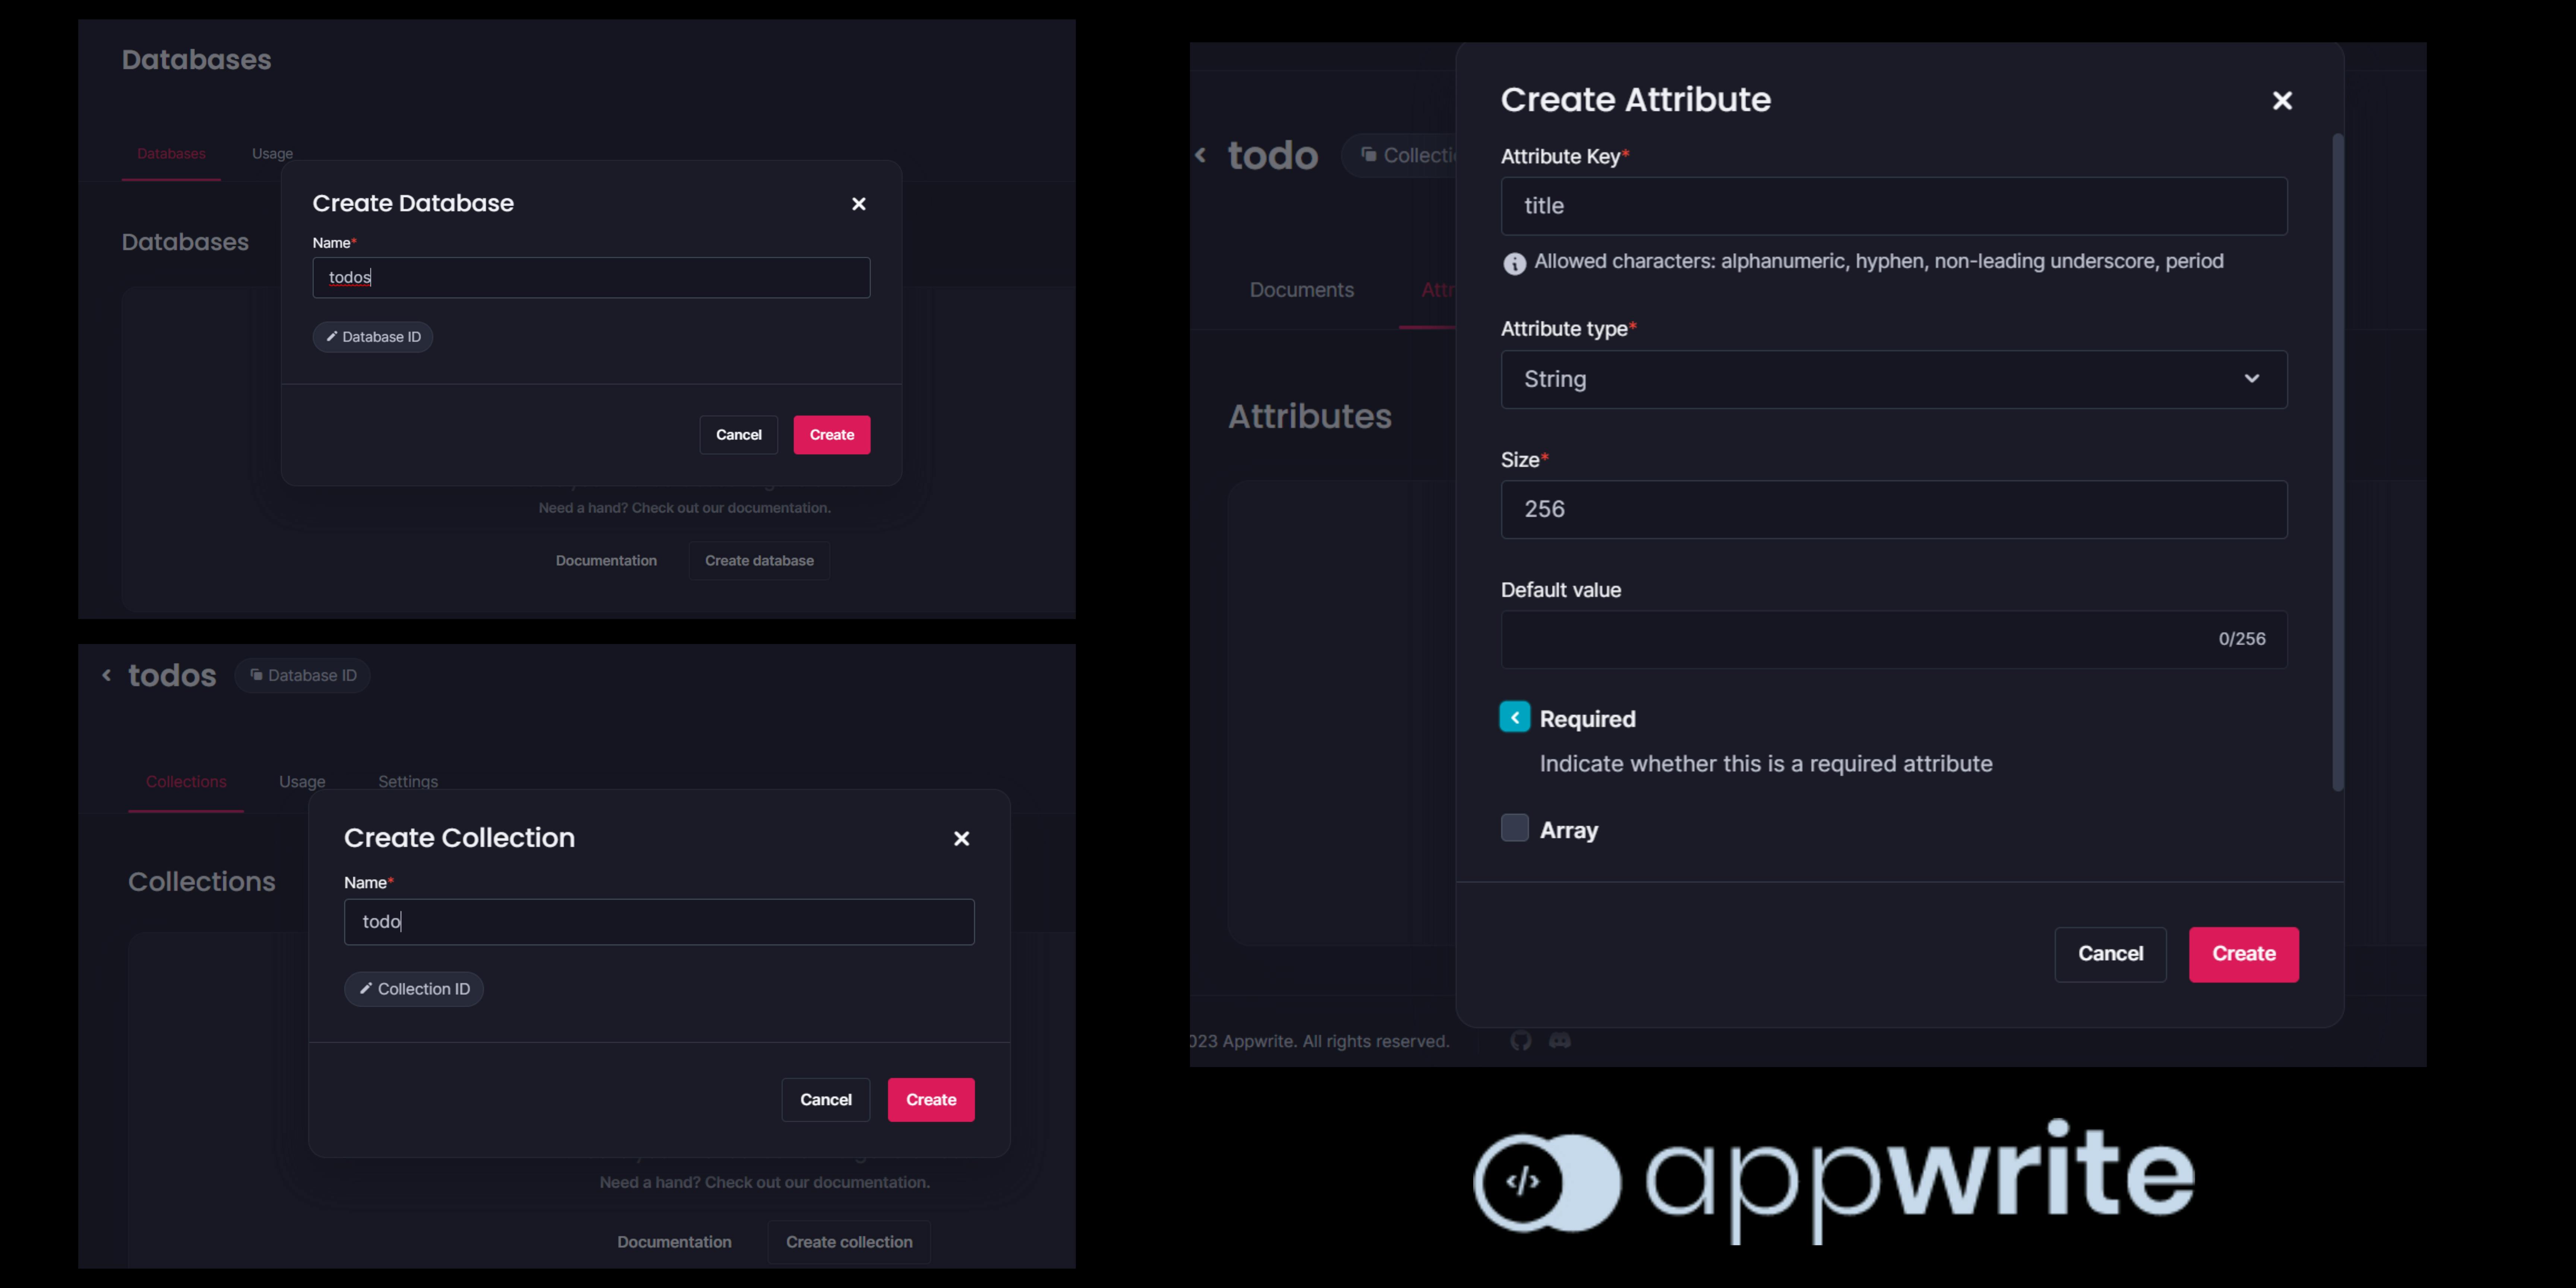 appwrite console for creating database and collections